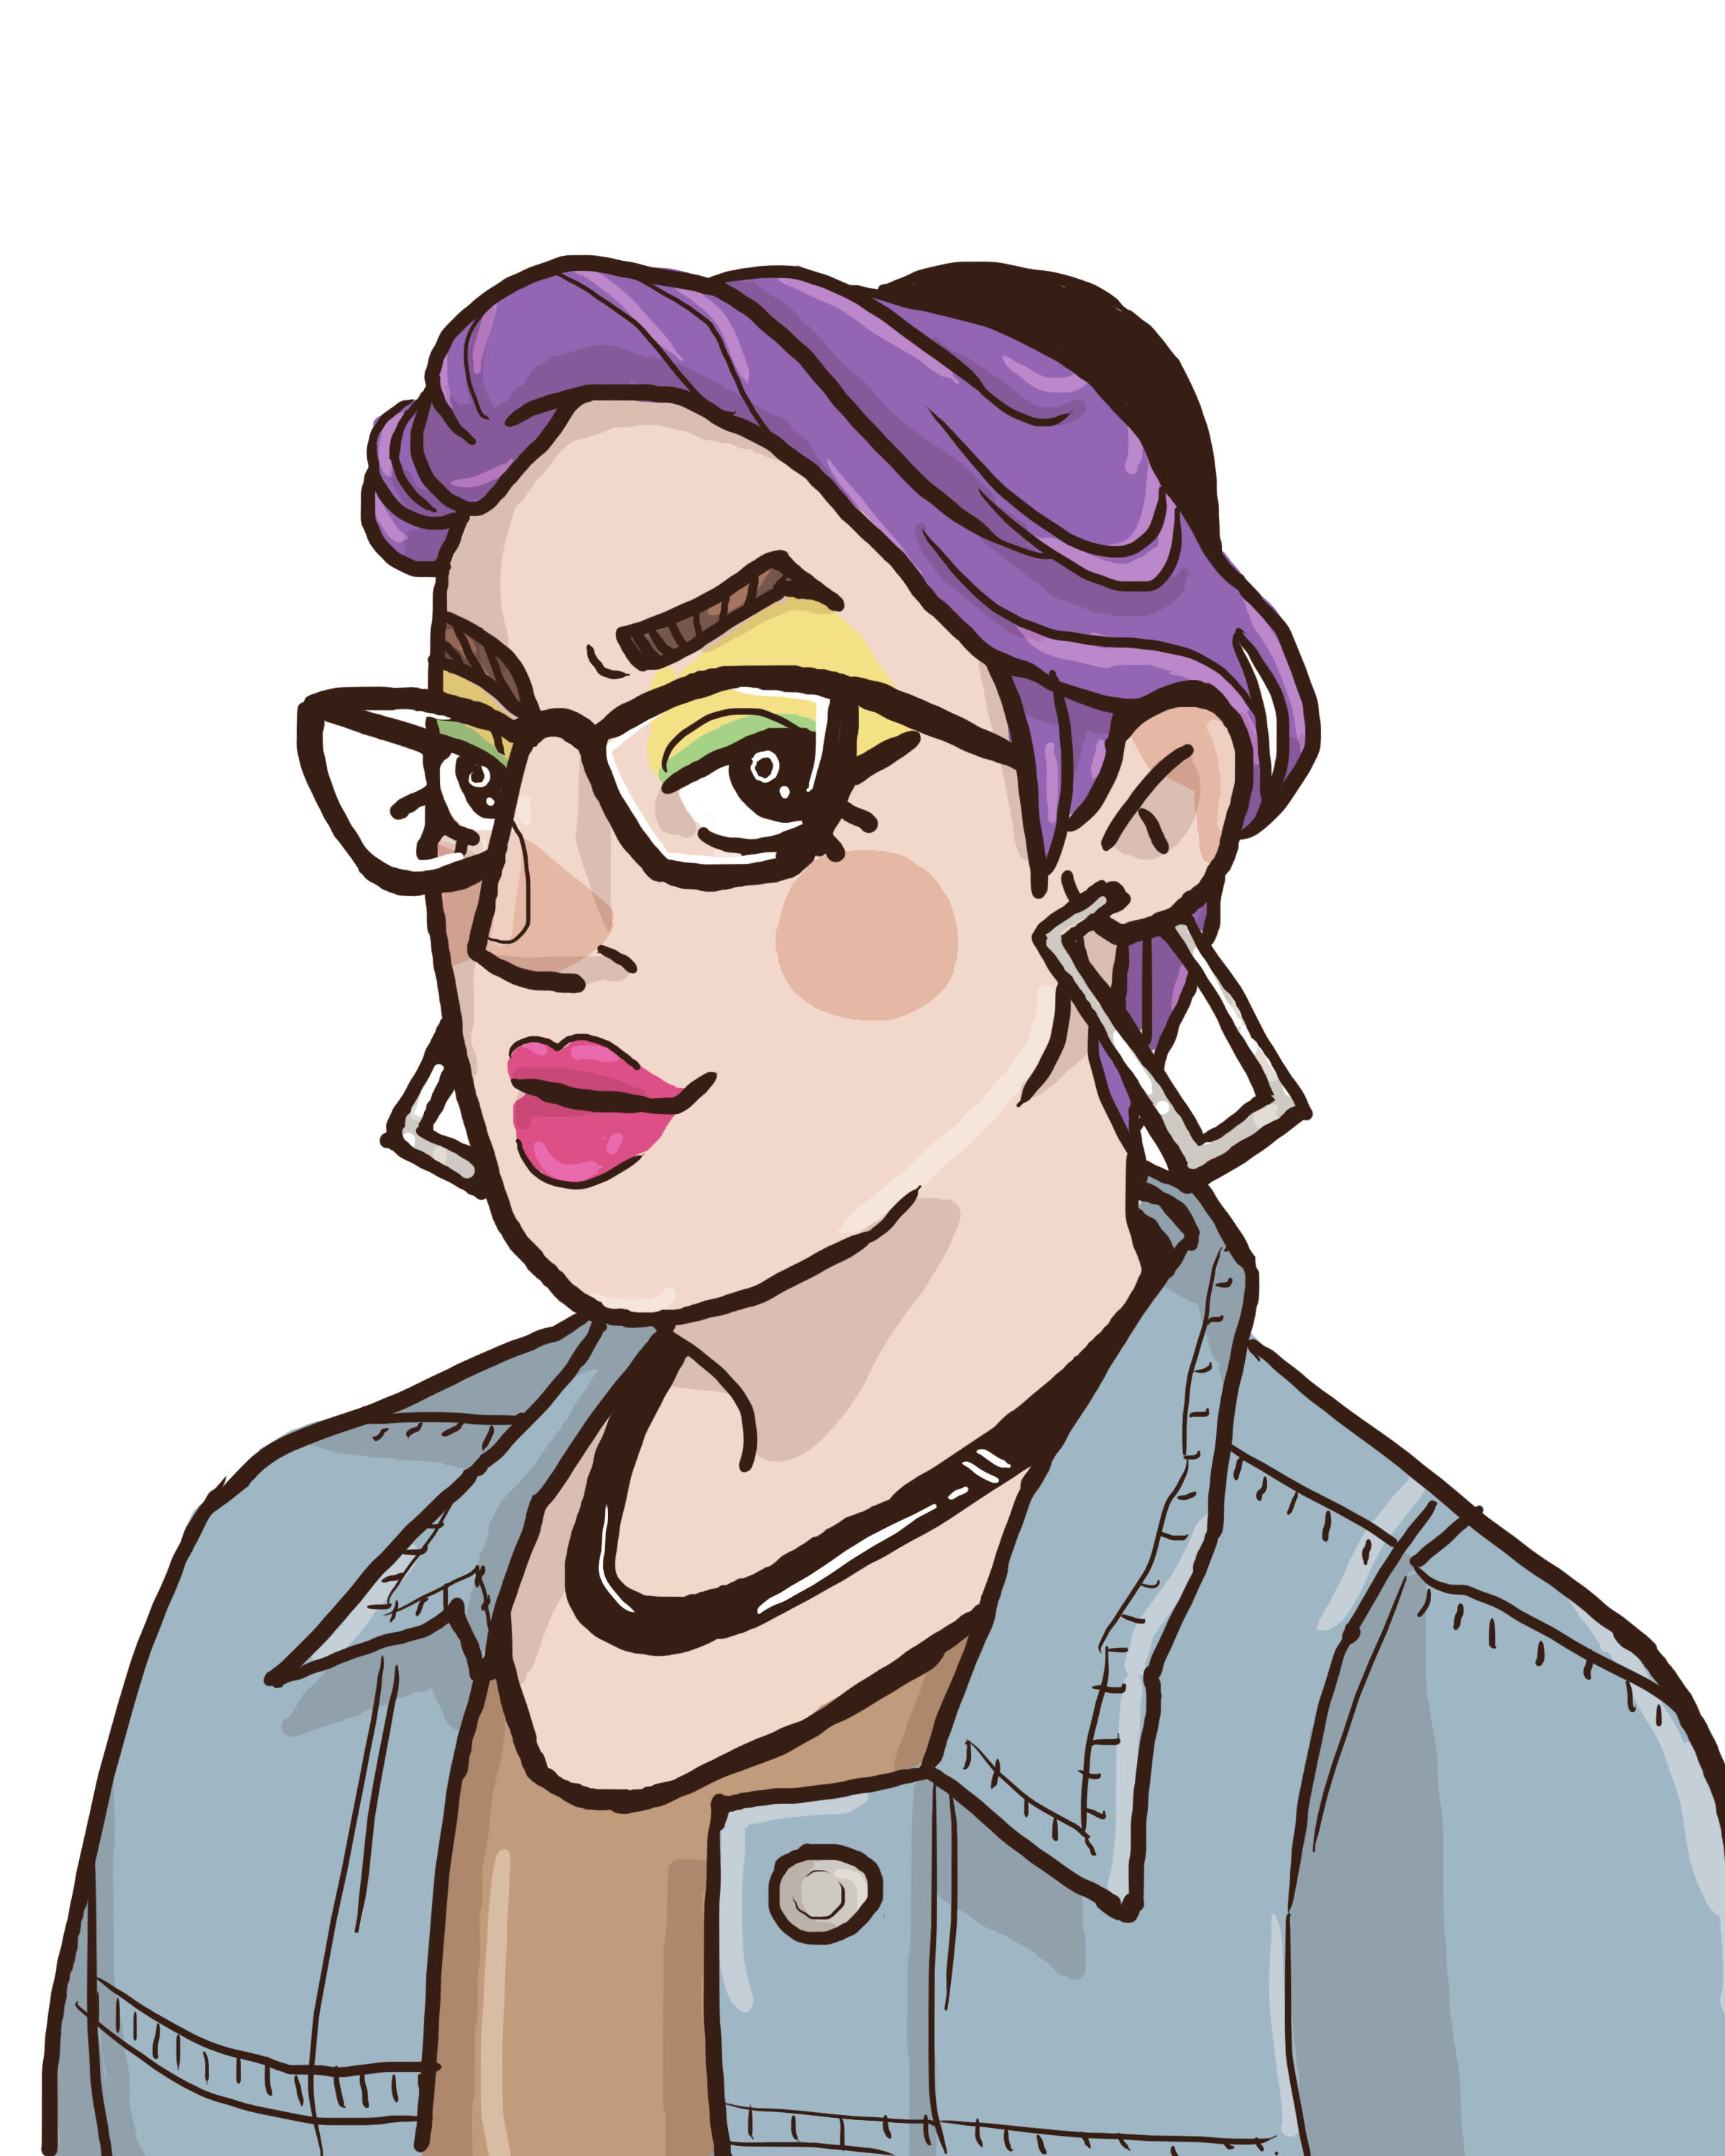 A cartoonish drawing of a white trans Jew with hair dyed bright purple. It is wearing a kippah as well as big glasses with thick frames, large rectangular earrings, and brightly colored eyeshadow and lipstick in a variety of greens, yellows, and pinks. It has a denim jacket on over a light brown dress.